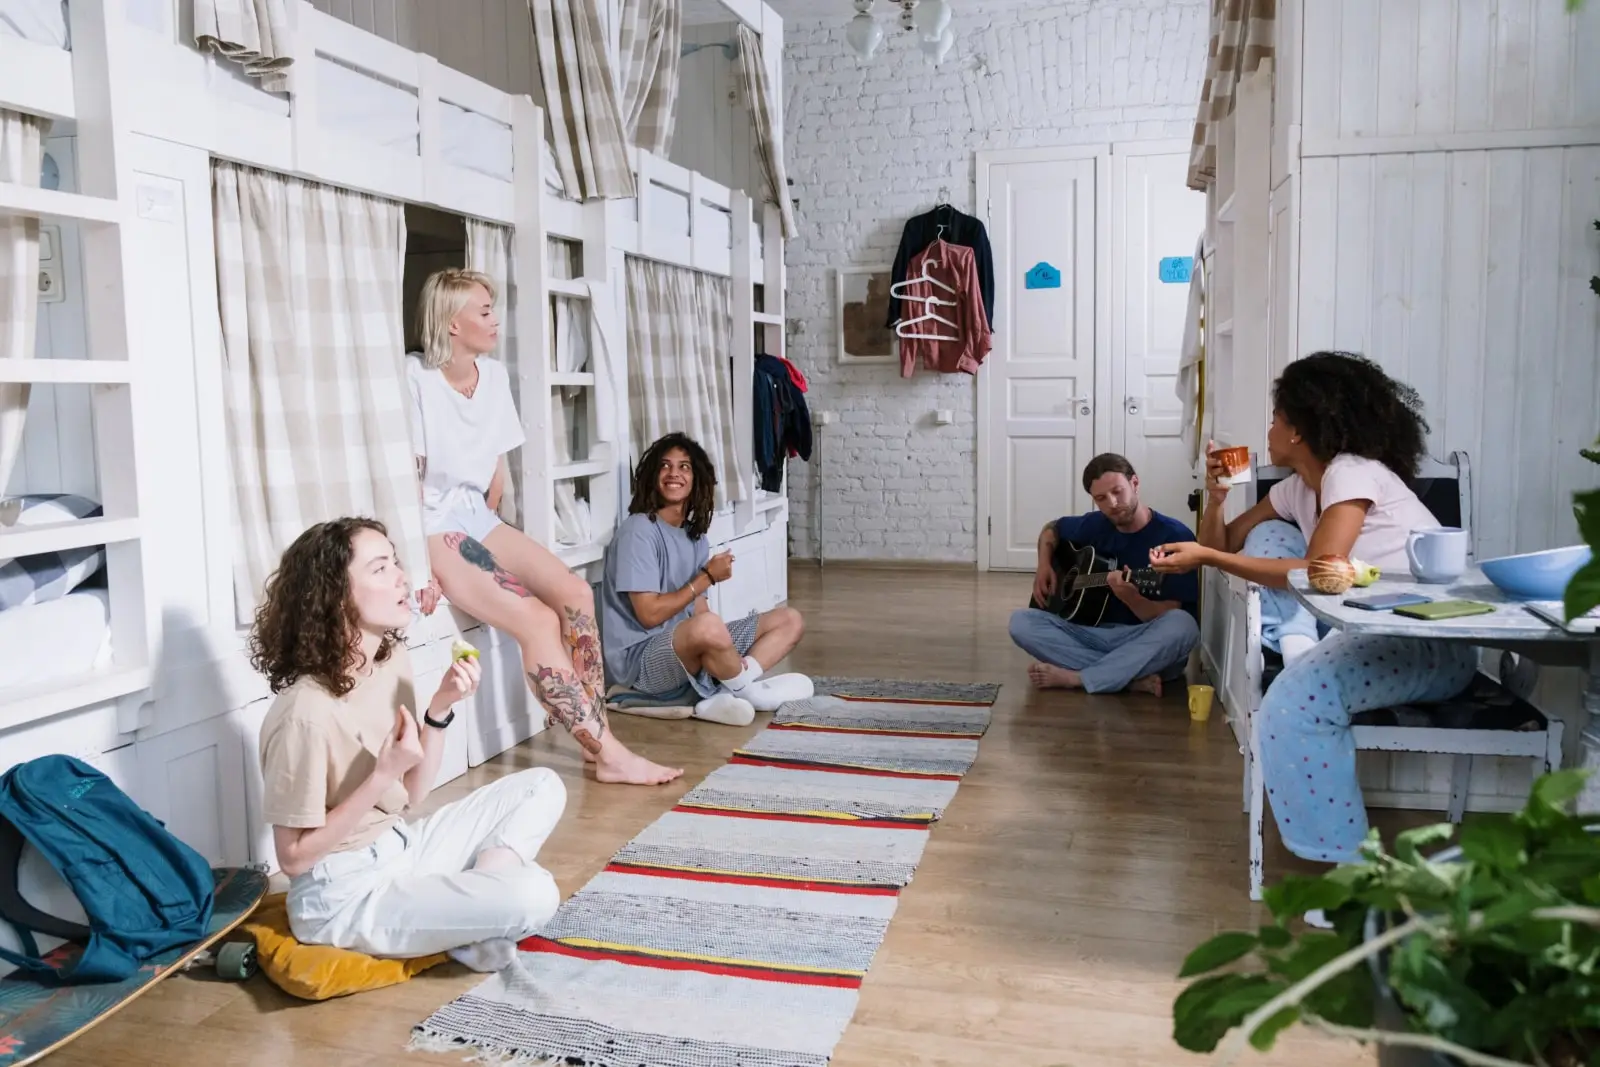 Coliving is great for those who are looking for a community